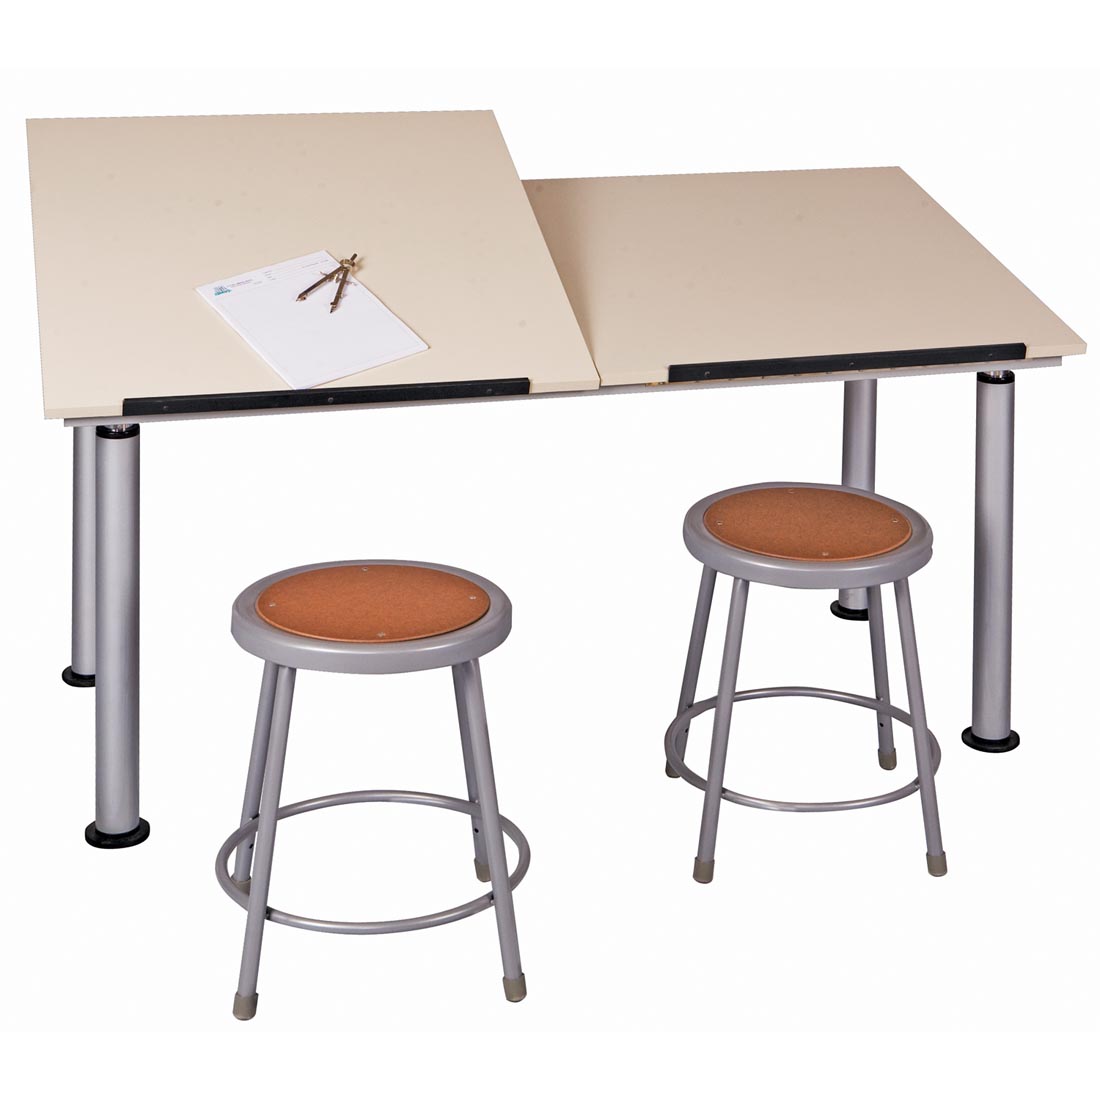 2-Student Station ALTD Table with one side's desk top in slanted position. Two stools are also shown.